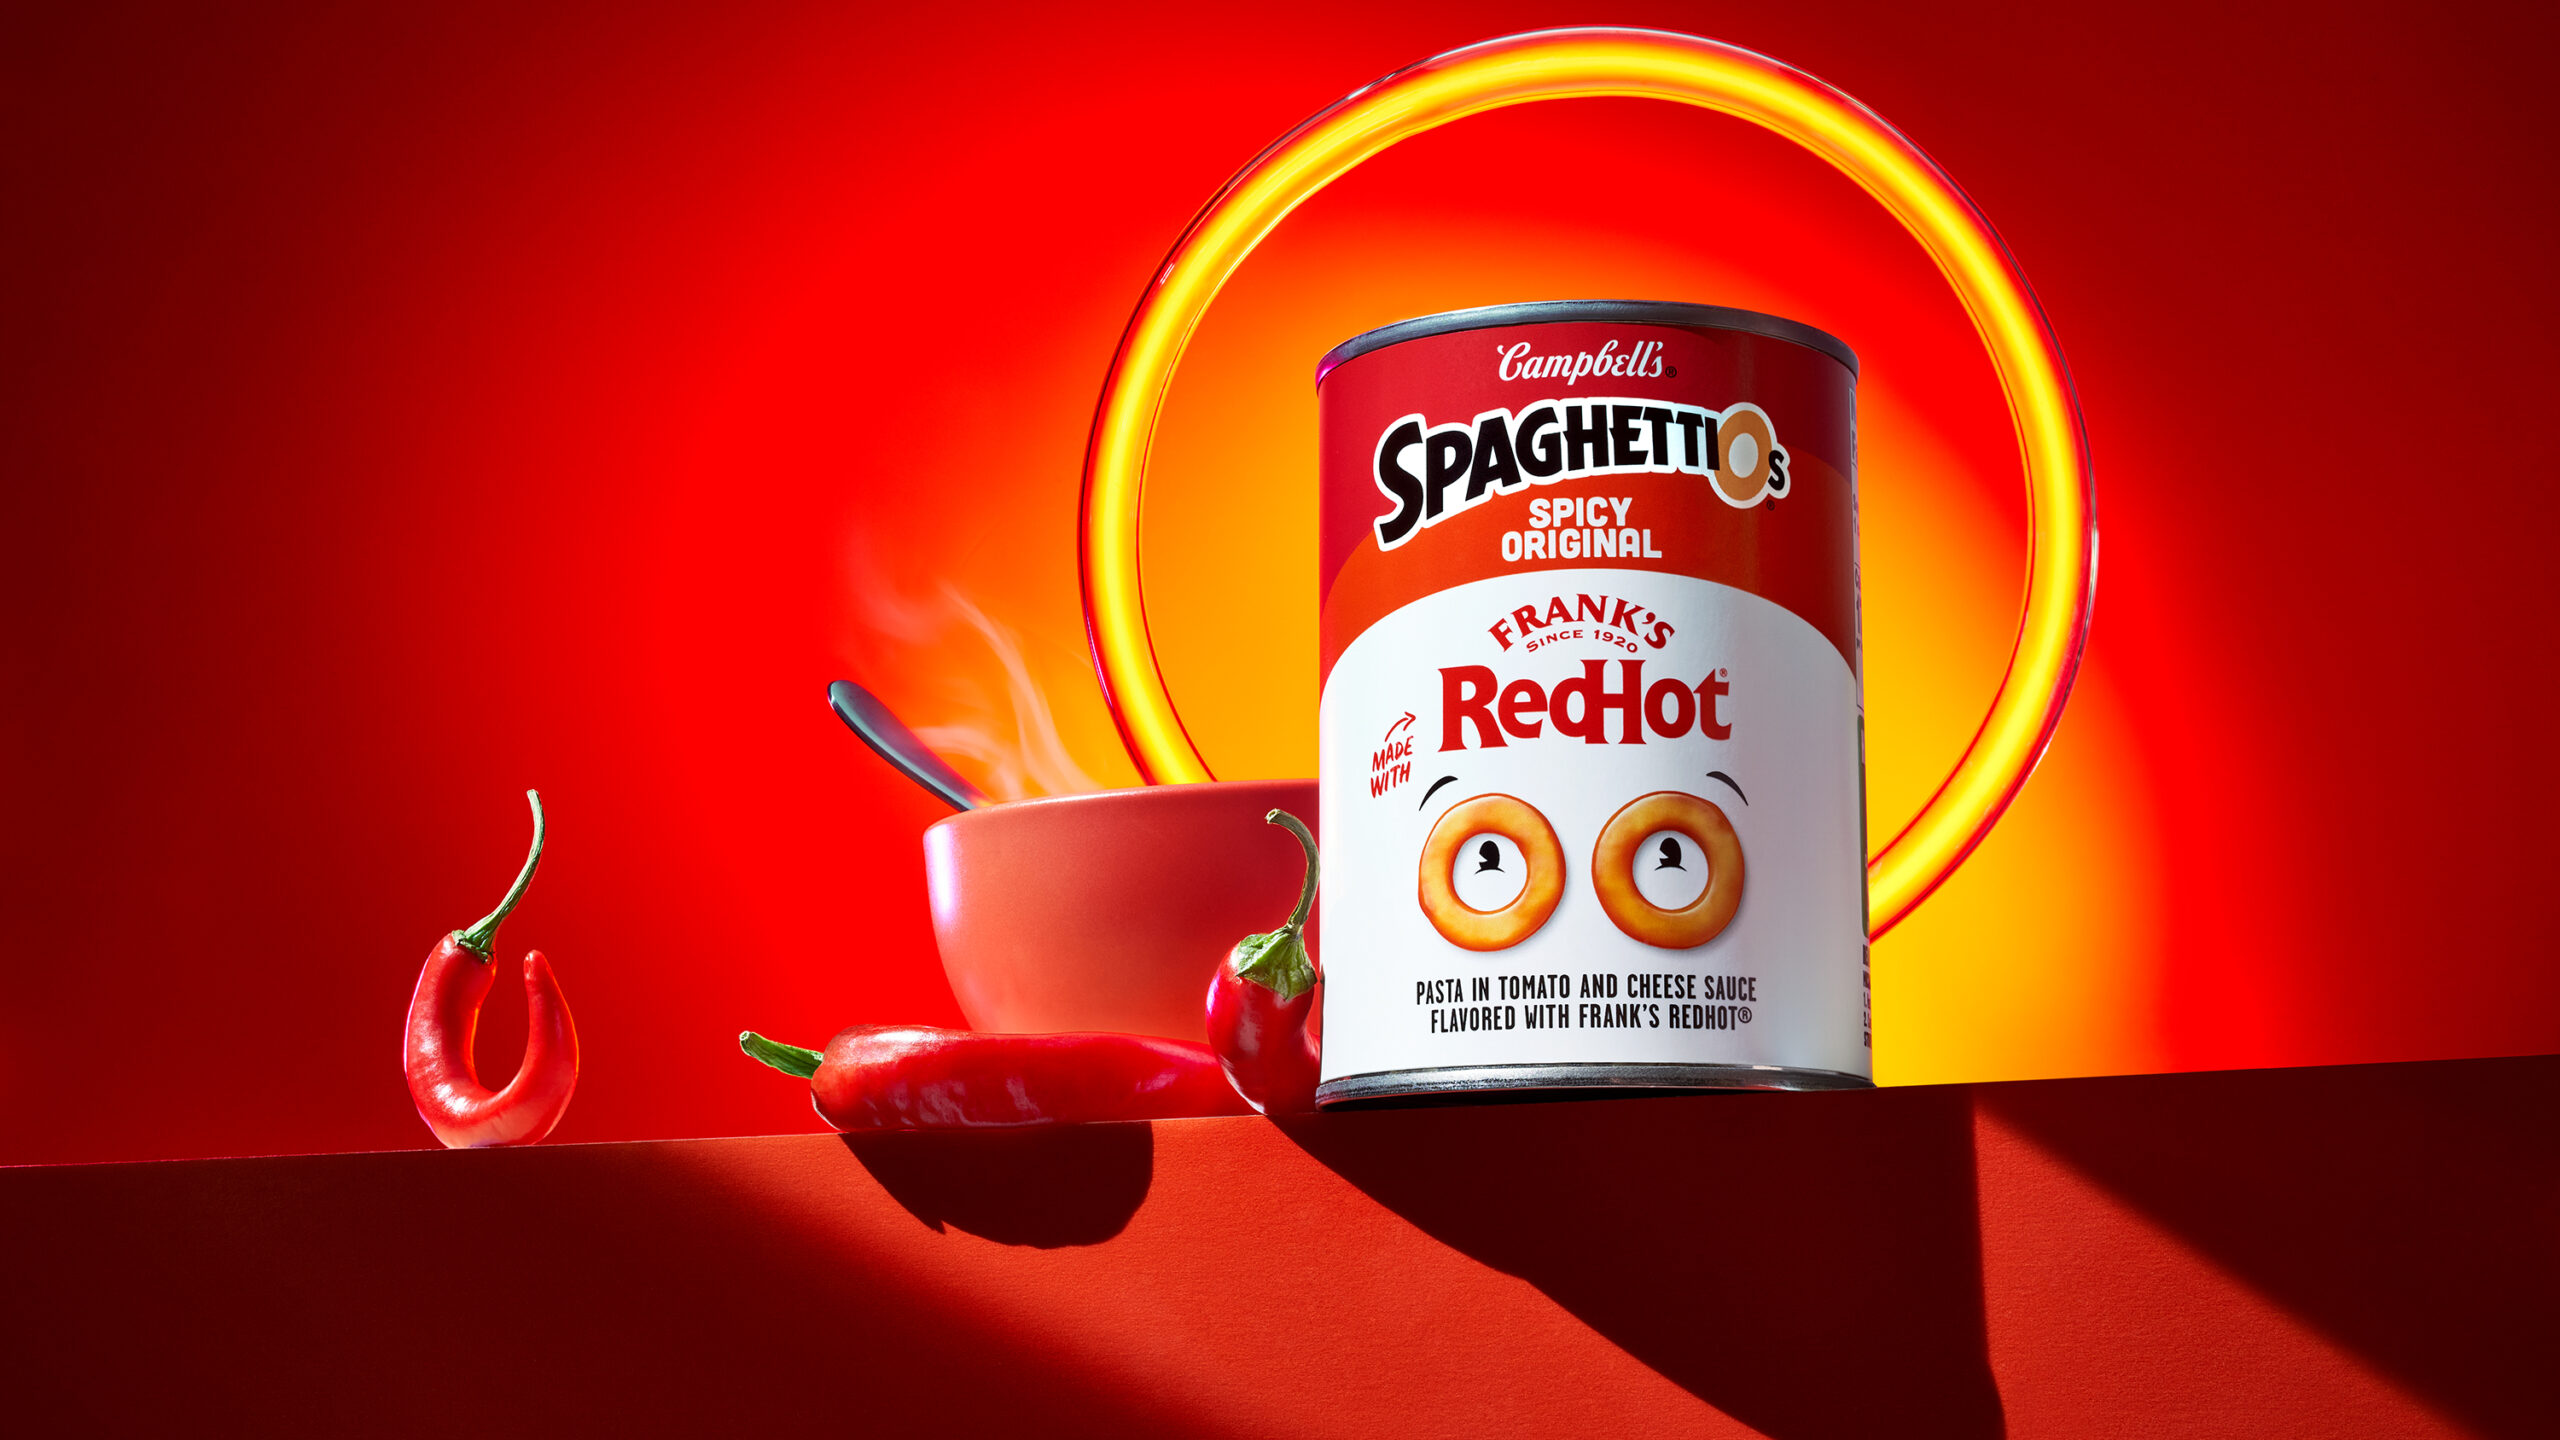 Campbell's® Spaghettios® Frank's RedHot® Spicy Original Pasta